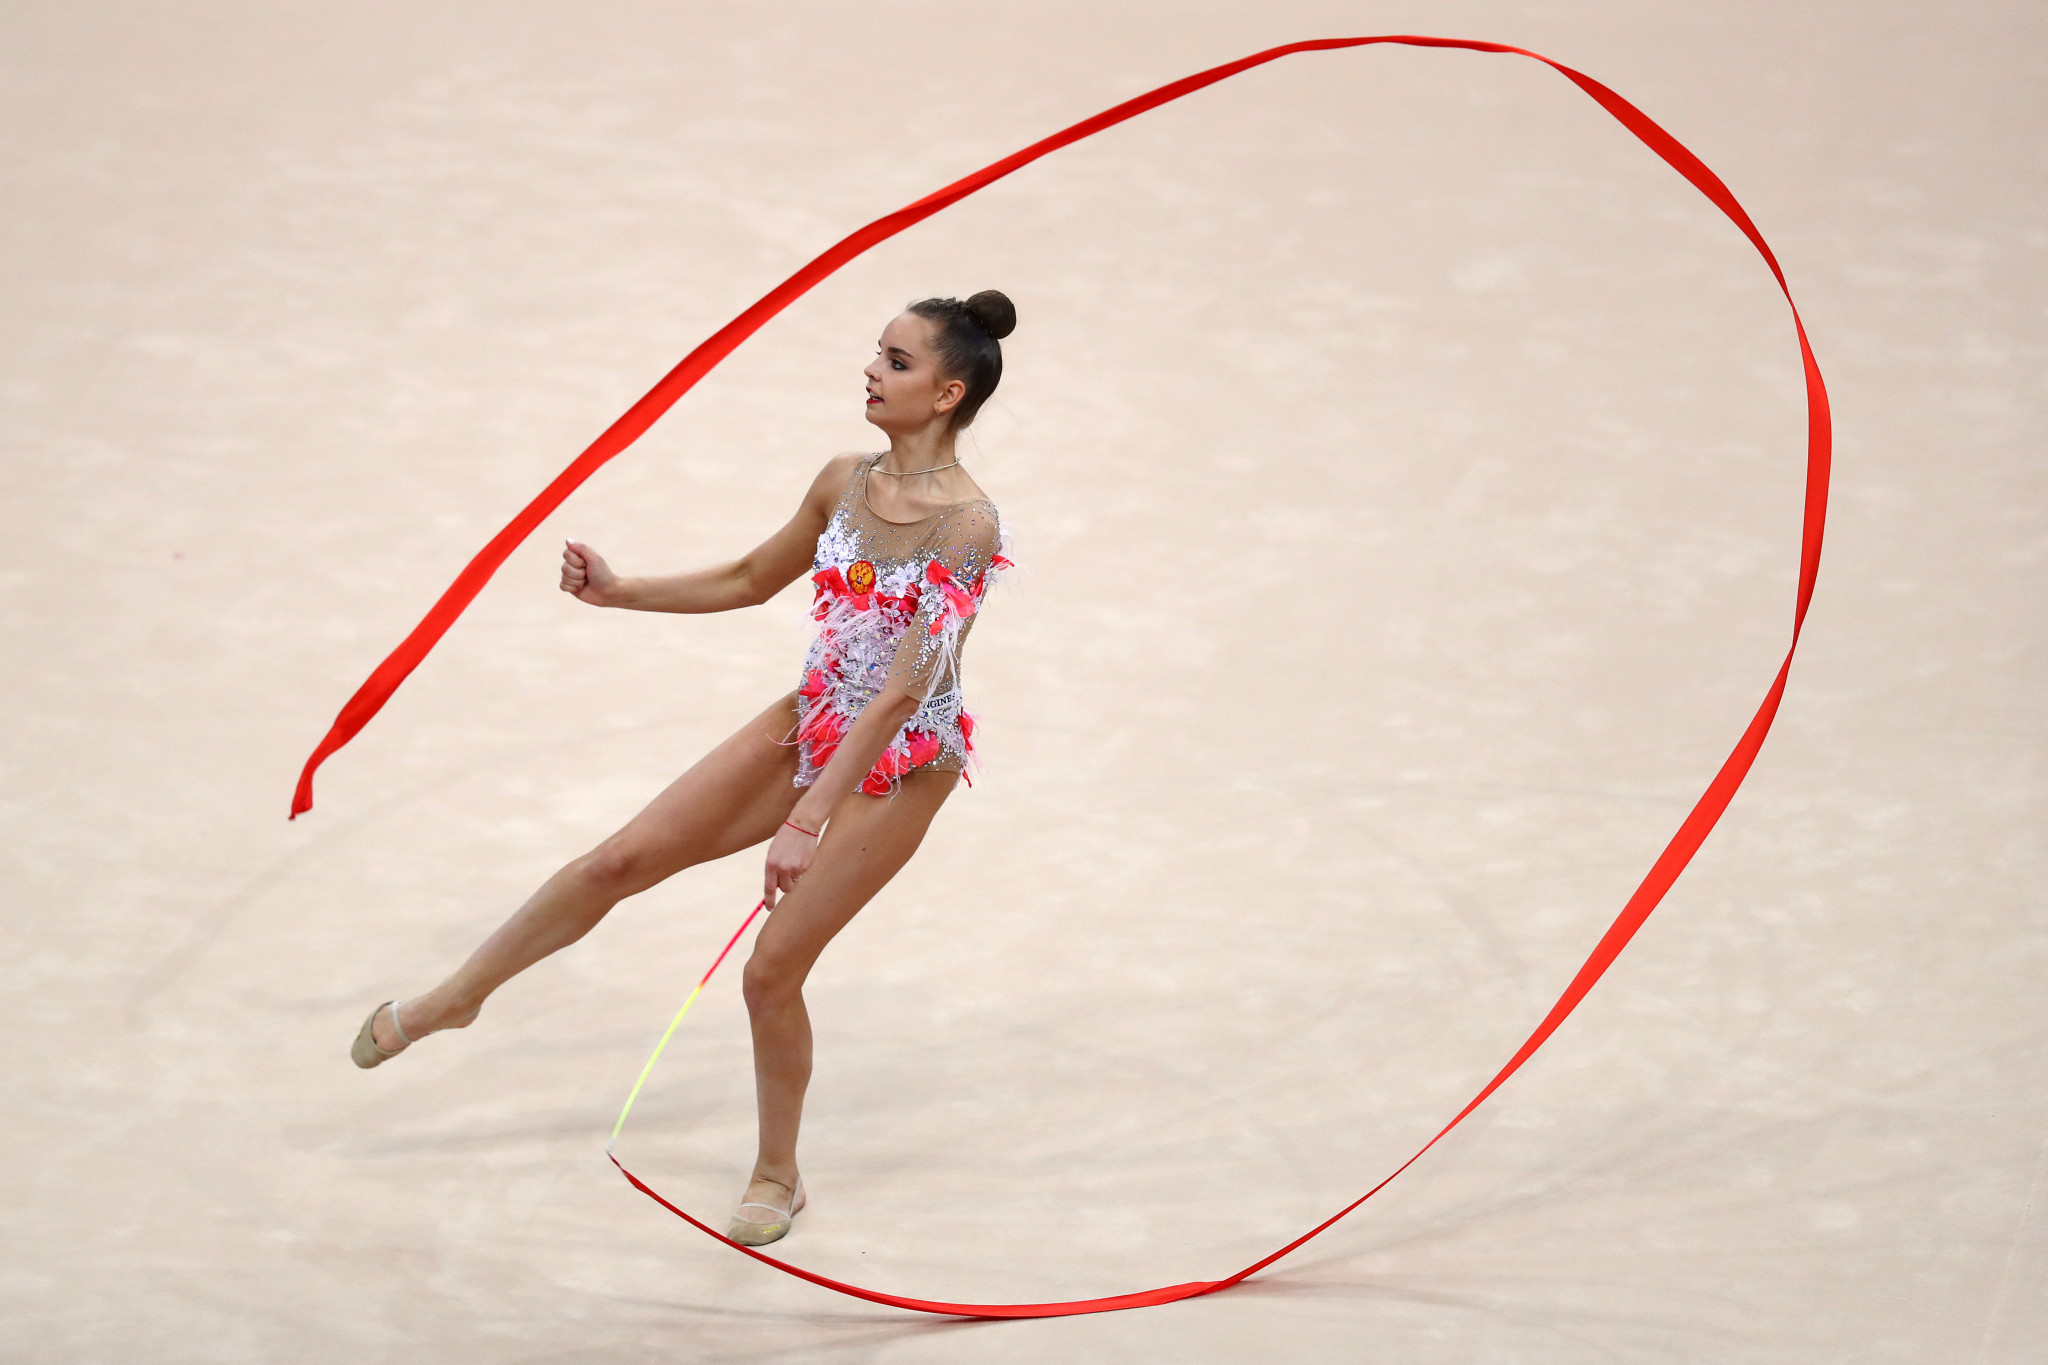 Dina Averina of Russia is leading the individual all-around competition ©Getty Images